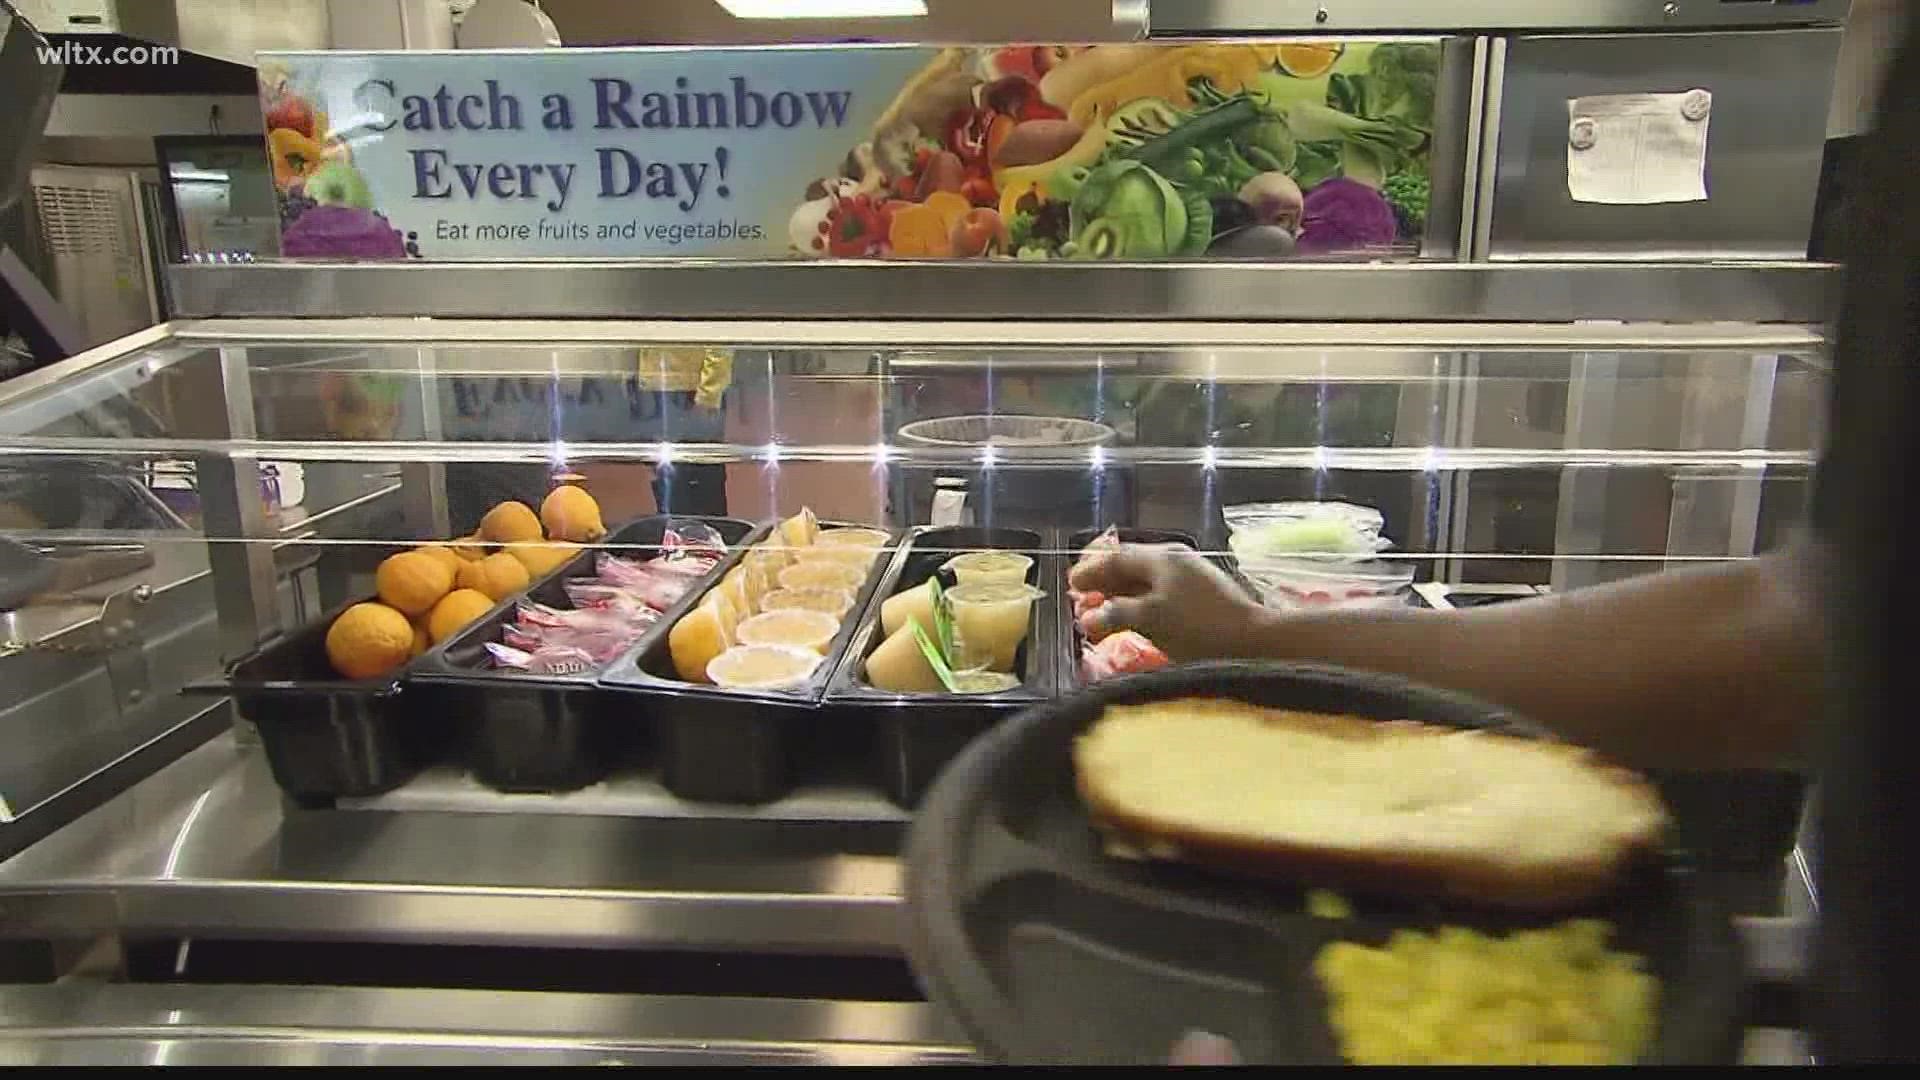 At least 500 schools, or about half the schools in the state provide free meals for students in public schools.